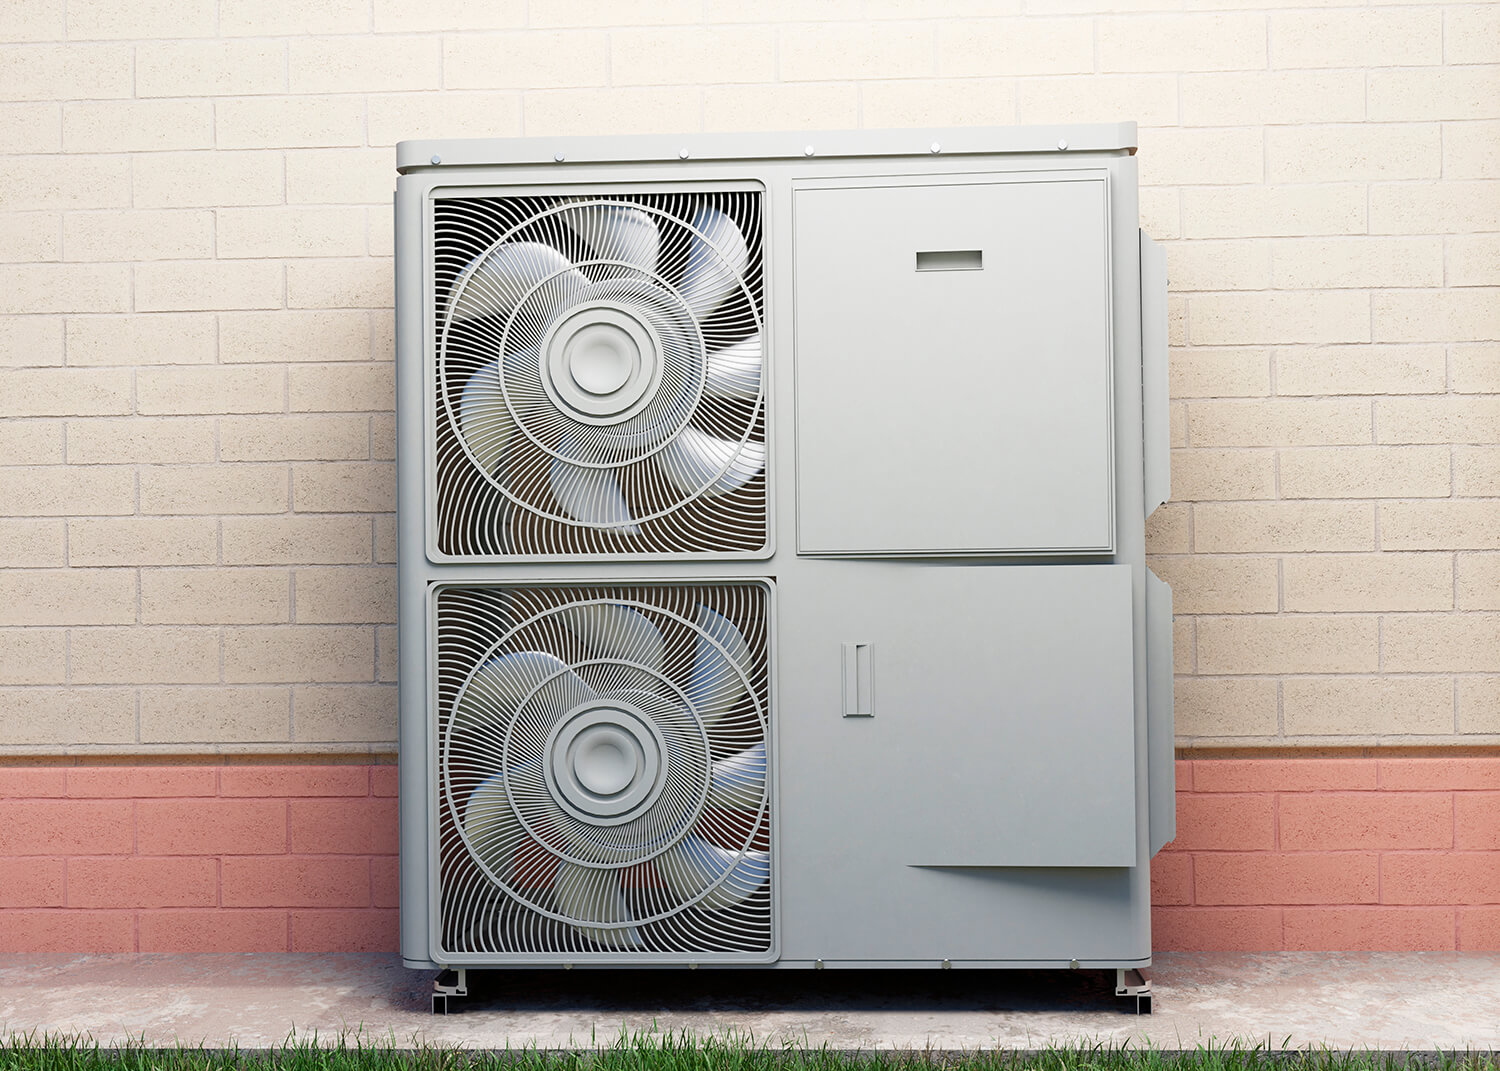 I want to get rid of my gas furnace for two big reasons